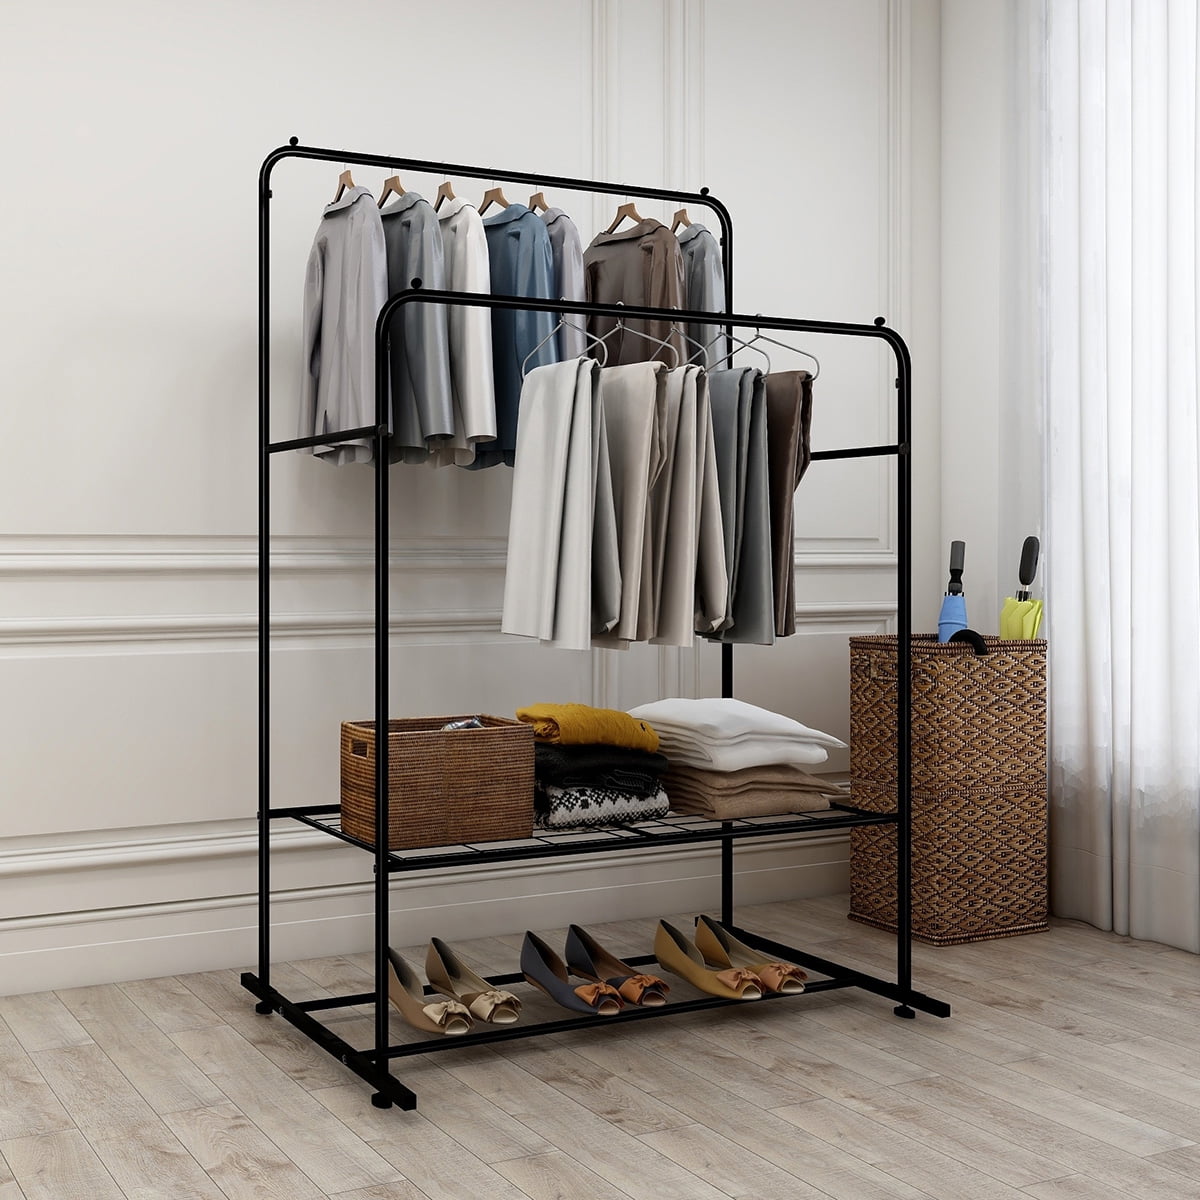 eSituro Double Rail Clothes Rack Adjustable Clothing Storage Garment Rack with 2 Tiers Shoe Rack Designed 4 Wheels Grey 